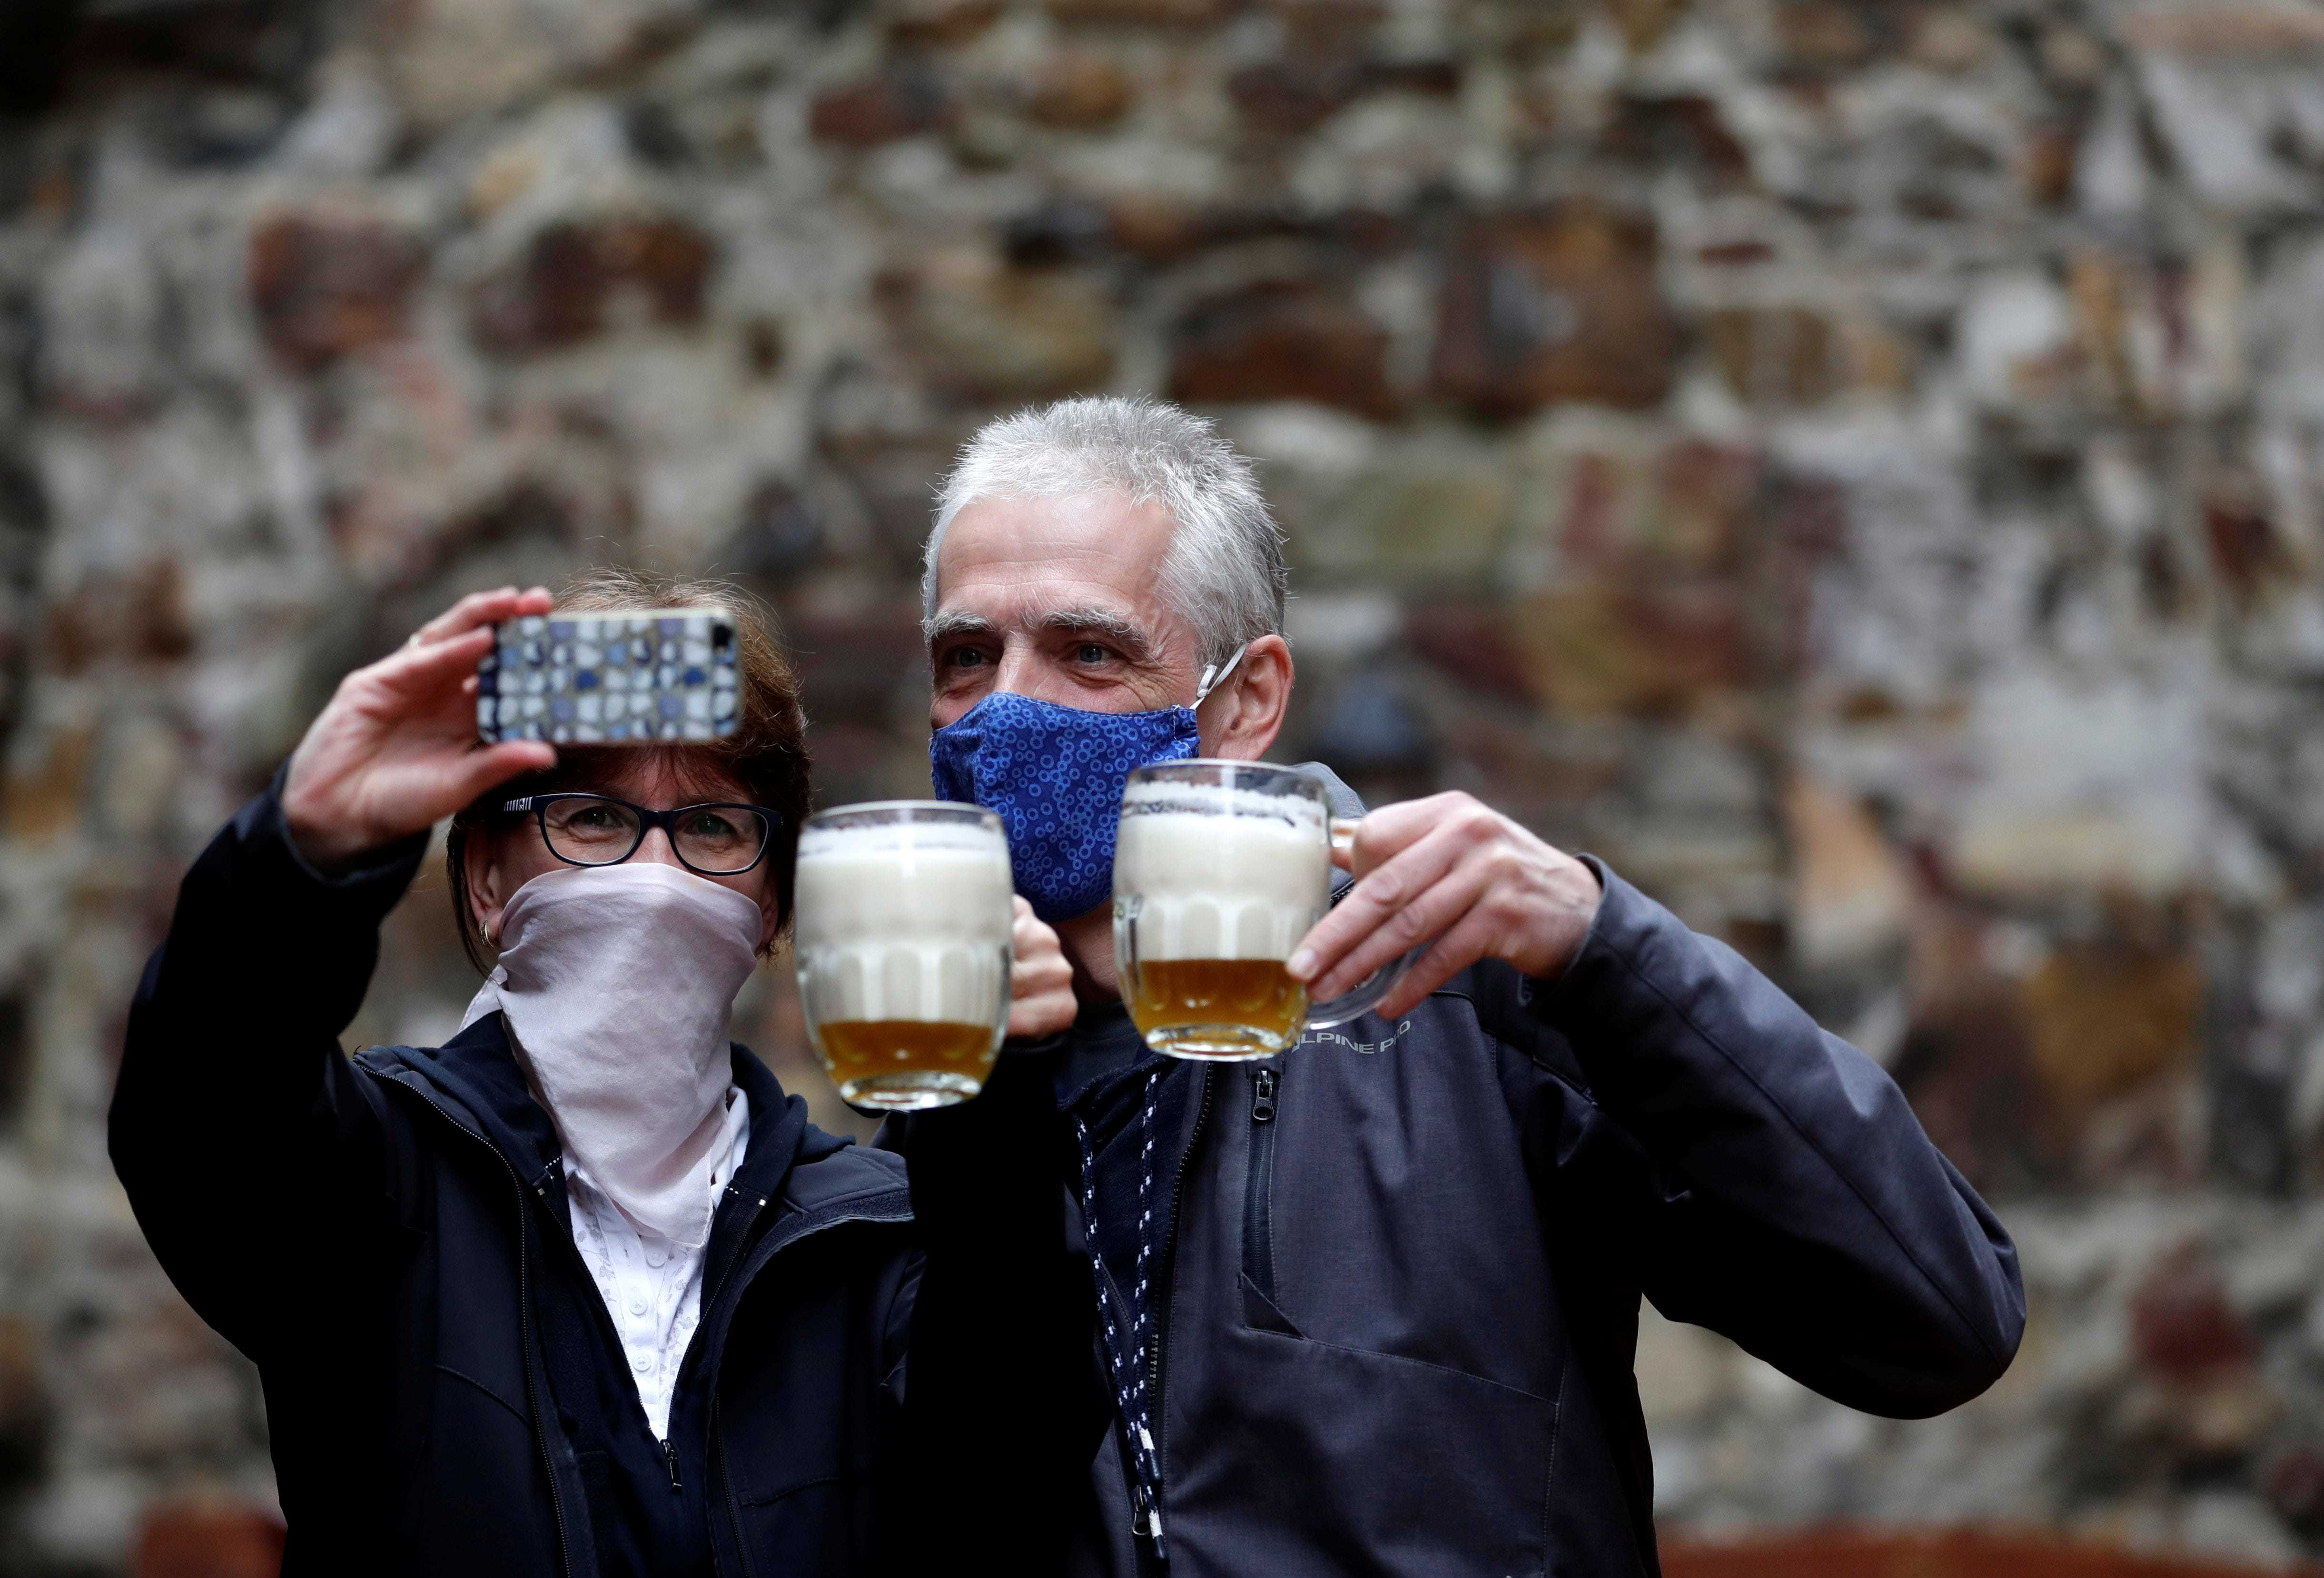 People take a selfie picture with their beers at an outdoor seating section of a pub, as the Czech government lifted more restrictions allowing restaurants with outdoor areas to re-open amid the coronavirus disease (COVID-19) outbreak, in Prague, Czech Republic, May 11, 2020. REUTERS/David W Cerny